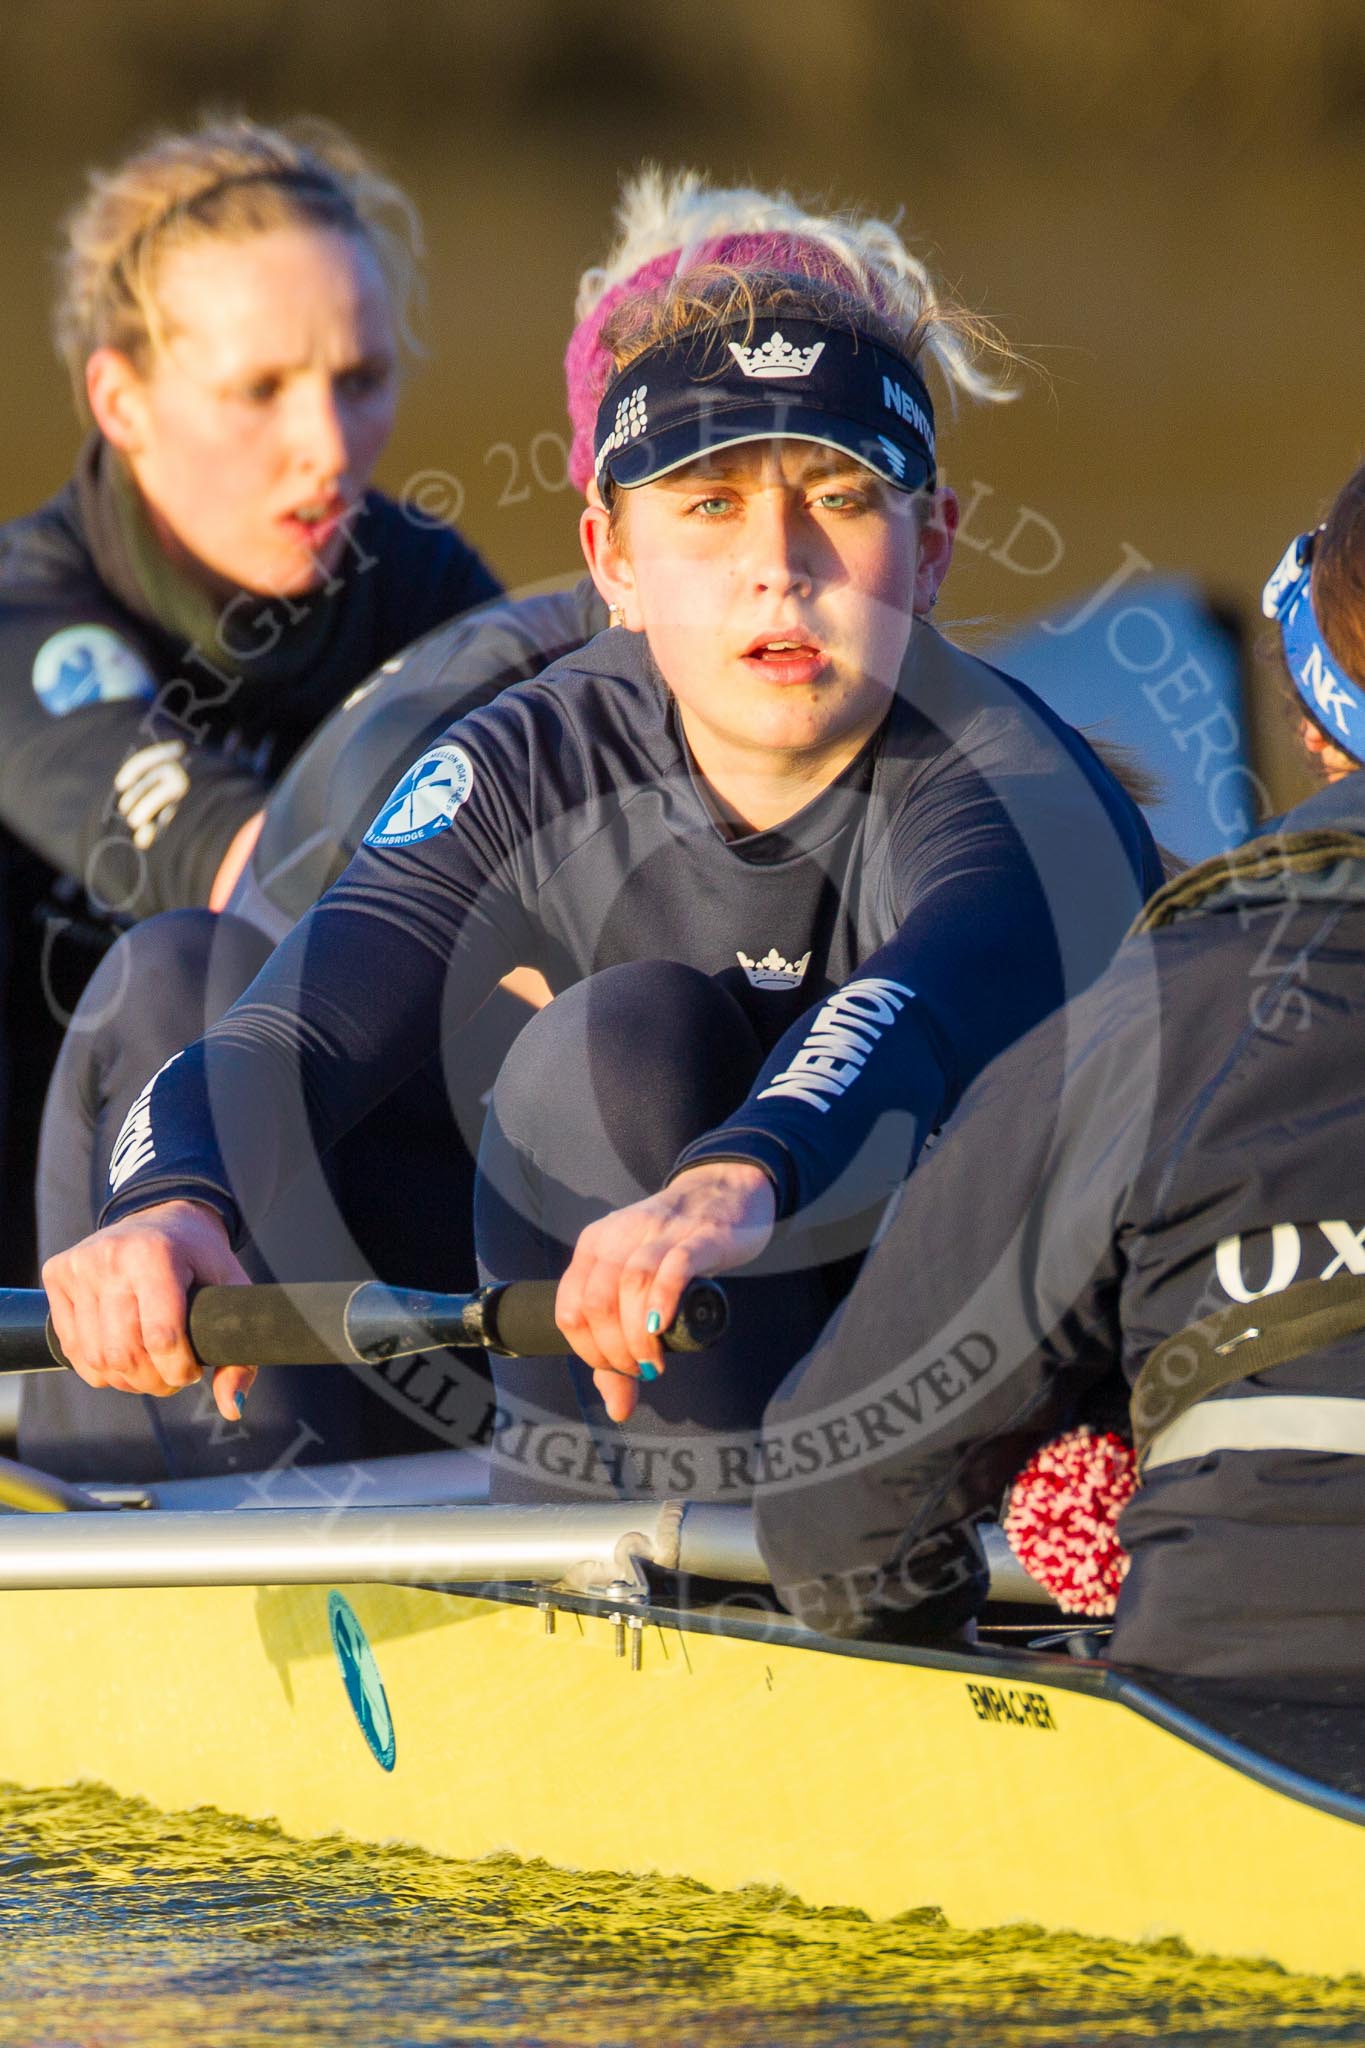 The Boat Race season 2015: OUWBC training Wallingford.

Wallingford,

United Kingdom,
on 04 March 2015 at 17:10, image #266